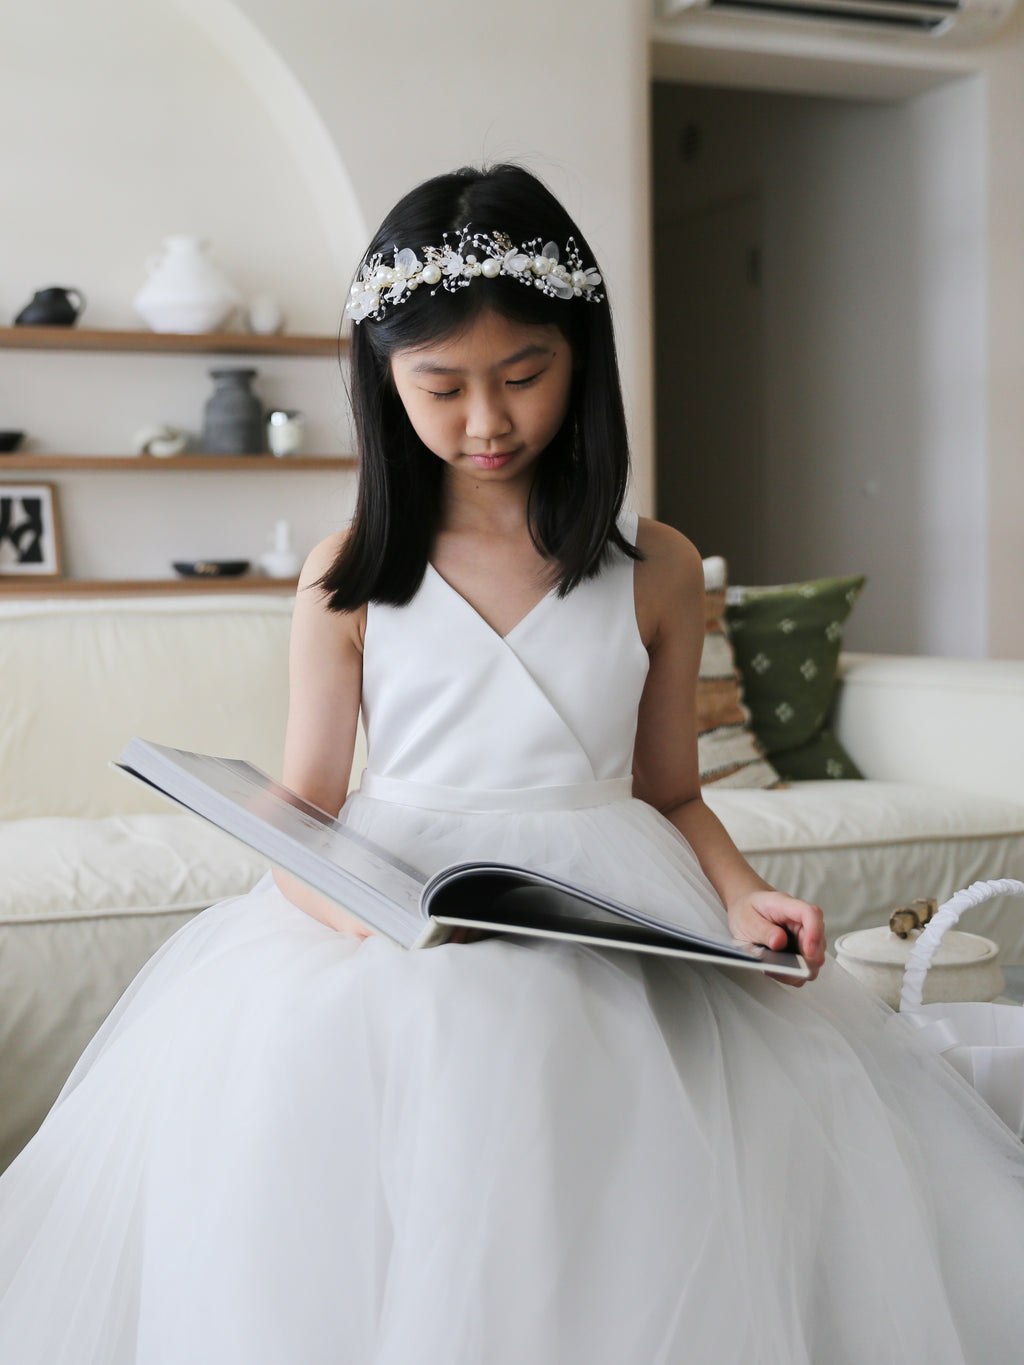 What are some age-appropriate dresses for 13-year-old girls? - Quora